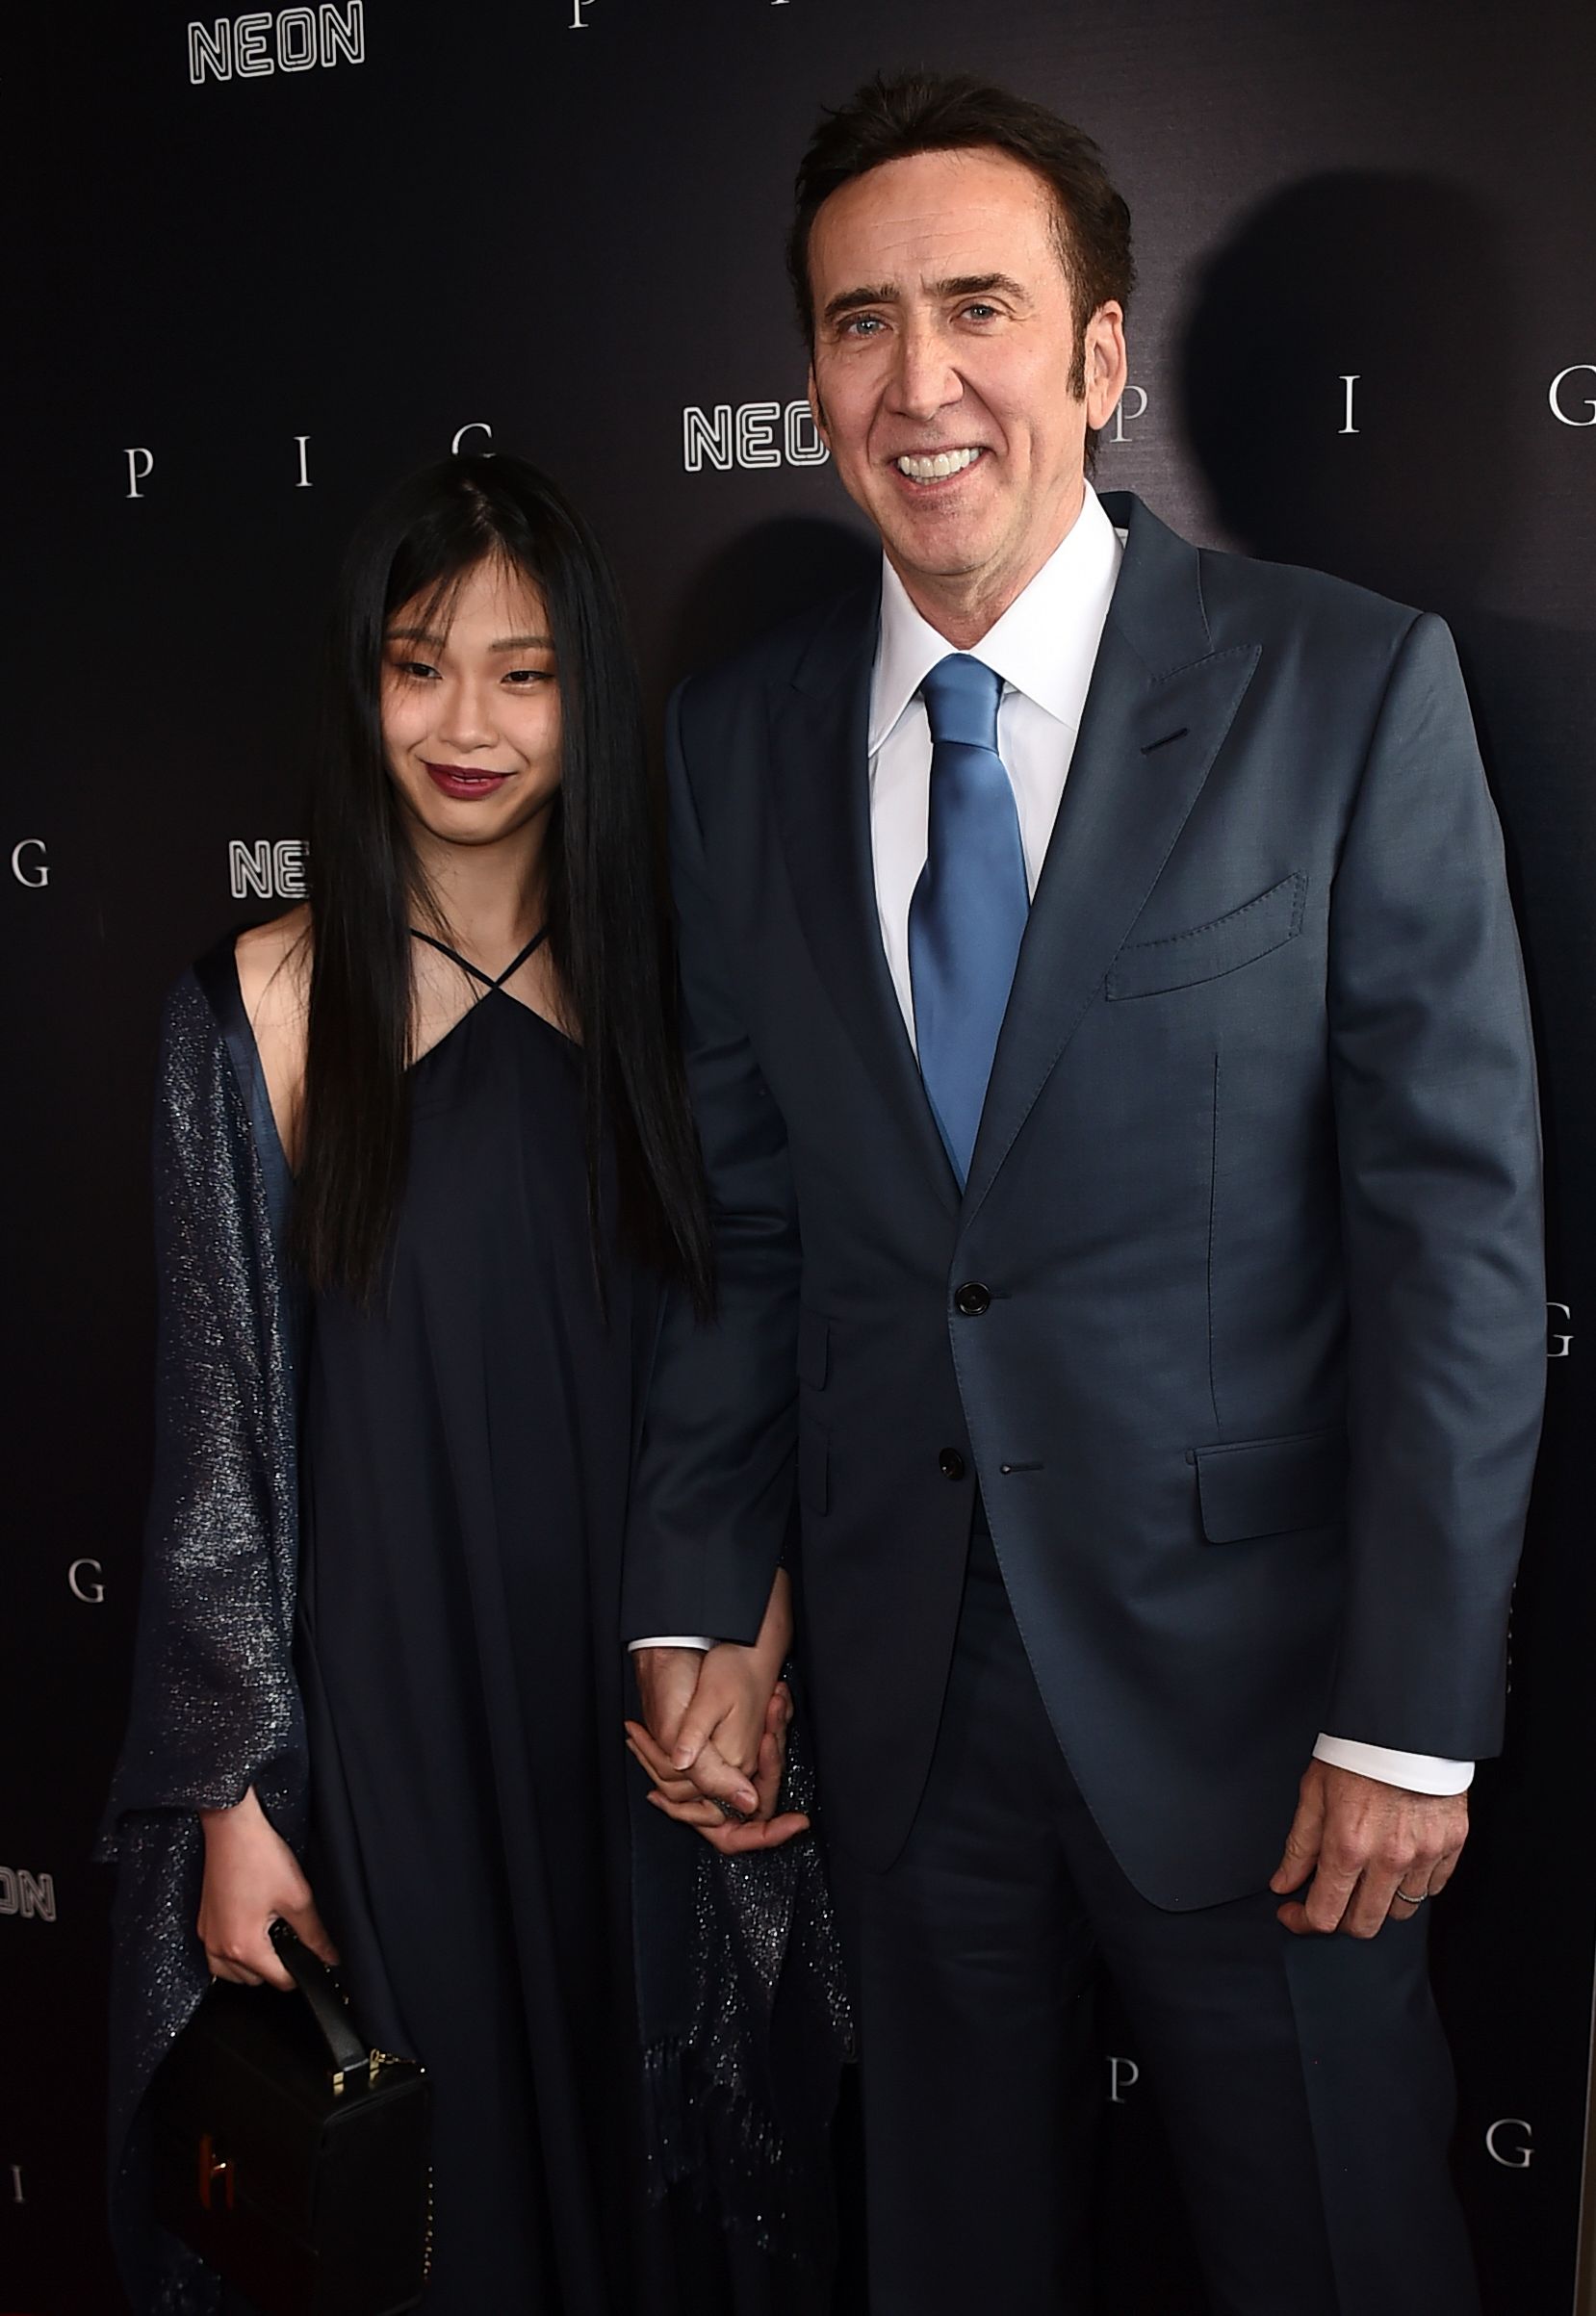 <p>Nicolas Cage fell for the woman who <a href="https://www.wonderwall.com/celebrity/couples/celebrity-weddings-of-2021-famous-people-who-got-married-this-year-465325.gallery?photoId=465443">became his fifth wife</a> while he was visiting her native country sometime in 2019. "We met in Japan and I thought she was stunning when I met her. We had a lot in common," Nic told <a href="https://www.etonline.com/nicolas-cage-says-wife-riko-shibatas-pet-flying-squirrels-had-a-hand-in-their-love-story-exclusive">"ET"</a> in July 2021. "She likes animals too, so I asked her, 'Do you have any pets?' And she said, 'Yes, I have flying squirrels.' She had two sugar gliders... <a href="https://www.wonderwall.com/news/nicolas-cage-said-flying-squirrels-attracted-him-to-fifth-wife-475858.article">I thought, 'That's it. This could work out.'"</a> He proposed in 2020 in the midst of the coronavirus pandemic. "She left New York [where she was visiting me] and went back to [her hometown of] Kyoto, Japan, and I went back to Nevada and I haven't seen her for six months [due to pandemic restrictions]," he explained on brother Marc "The Cope" Coppola's <a href="https://www.youtube.com/watch?v=Lvj7EuW6vA4&t=15s">Q104.3 radio show</a> in August 2020. "We were really happy together ... so I finally just said, 'Look, I wanna marry you,' and we got engaged on FaceTime. And I got her a black diamond engagement ring -- 'cause her favorite color is black, she wanted the black gold and the black diamond, so I found it and customized it and personalized it. I actually sent it to her via FedEx." The couple wed in Las Vegas in February 2021.</p>